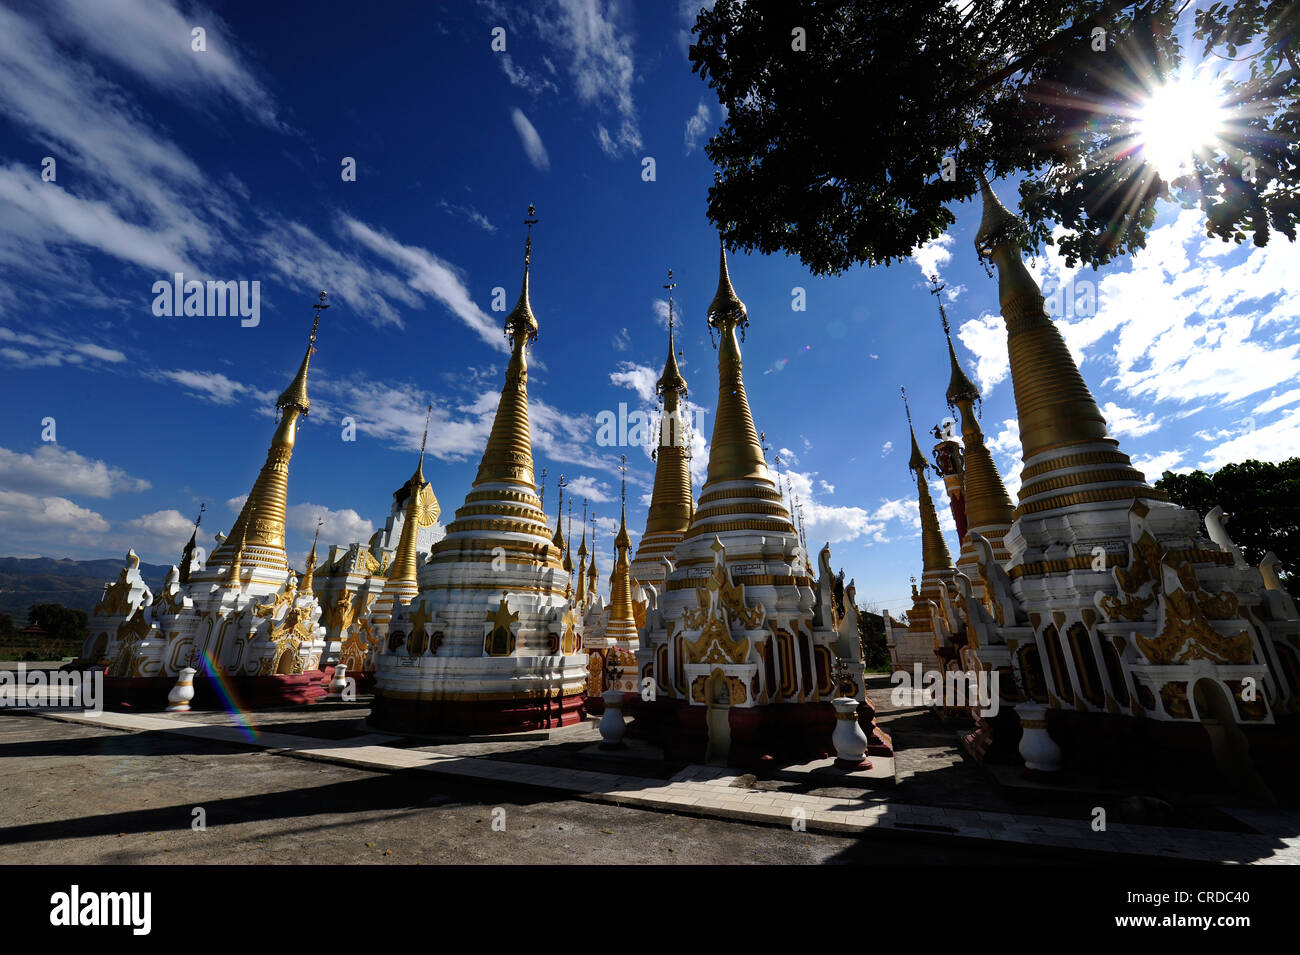 Pagodas of a monastery complex in Nyaungshwe on Inle Lake in Myanmar, Burma, Southeast Asia, Asia Stock Photo